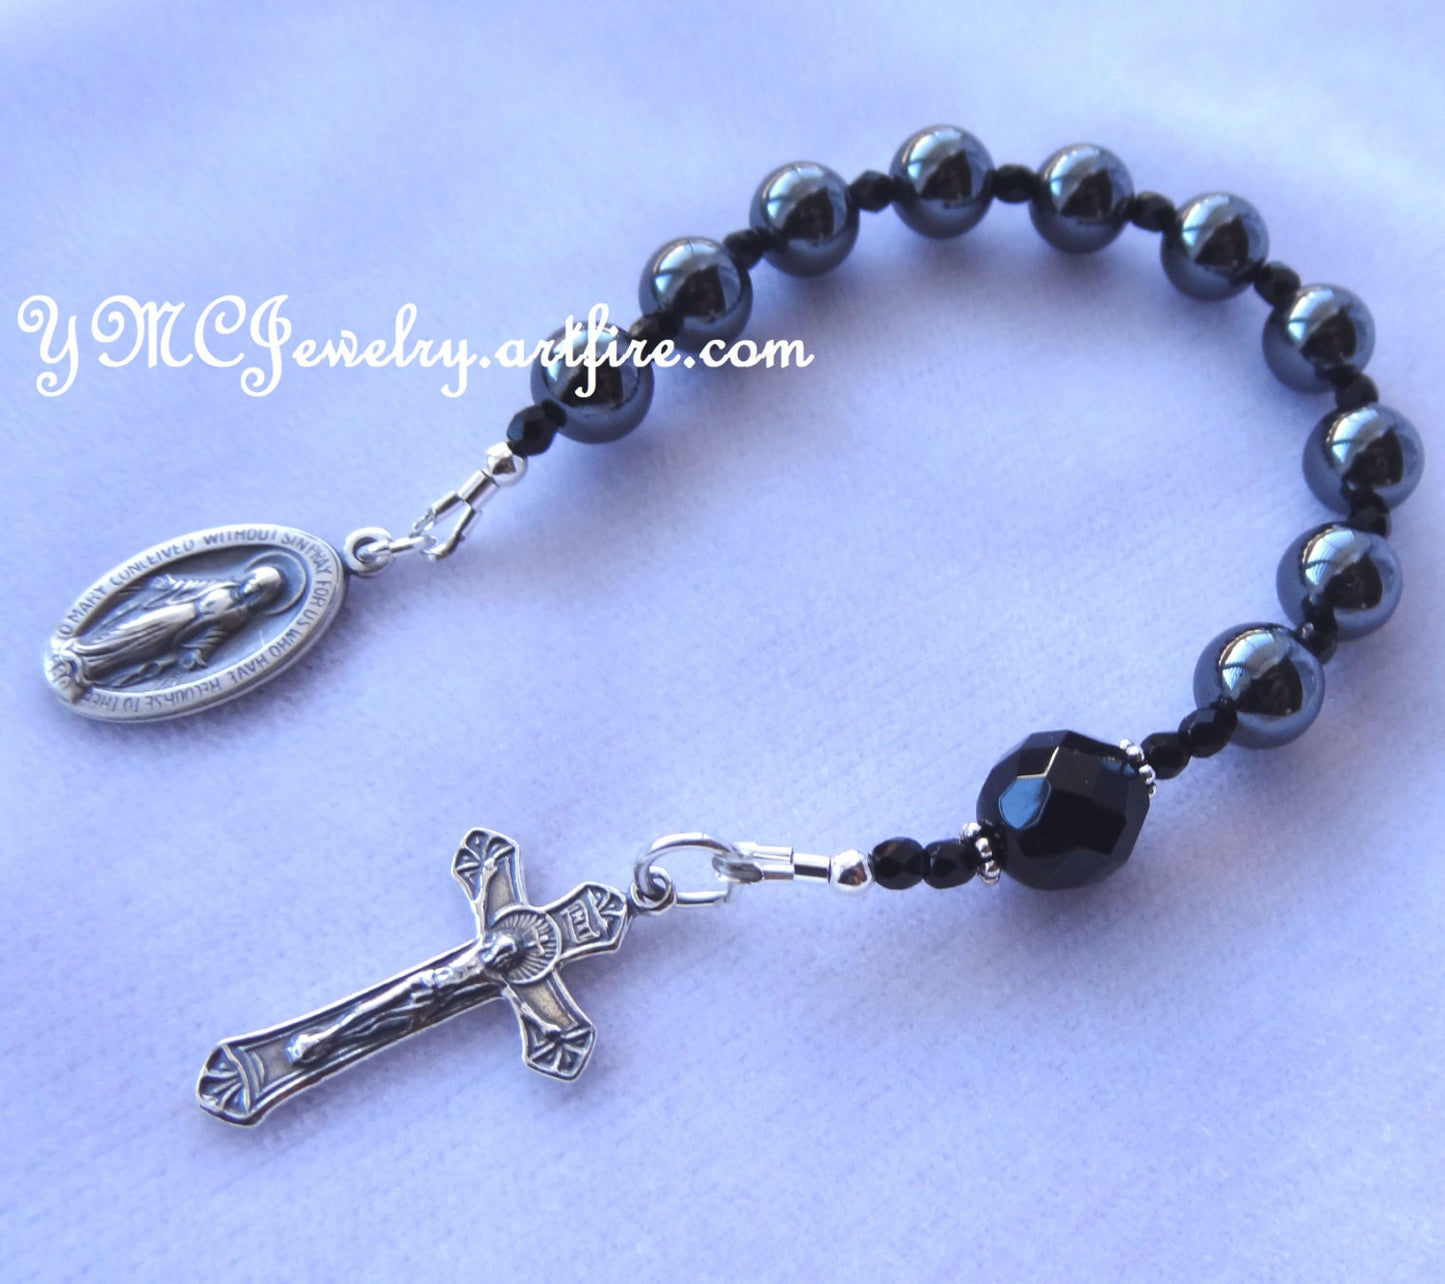 Chaplet Rosary, First Communion, Godparents Present, Angel Chaplet, Boys Confirmation, Black and Gray Chaplet, Snowflake Hematite Chaplet